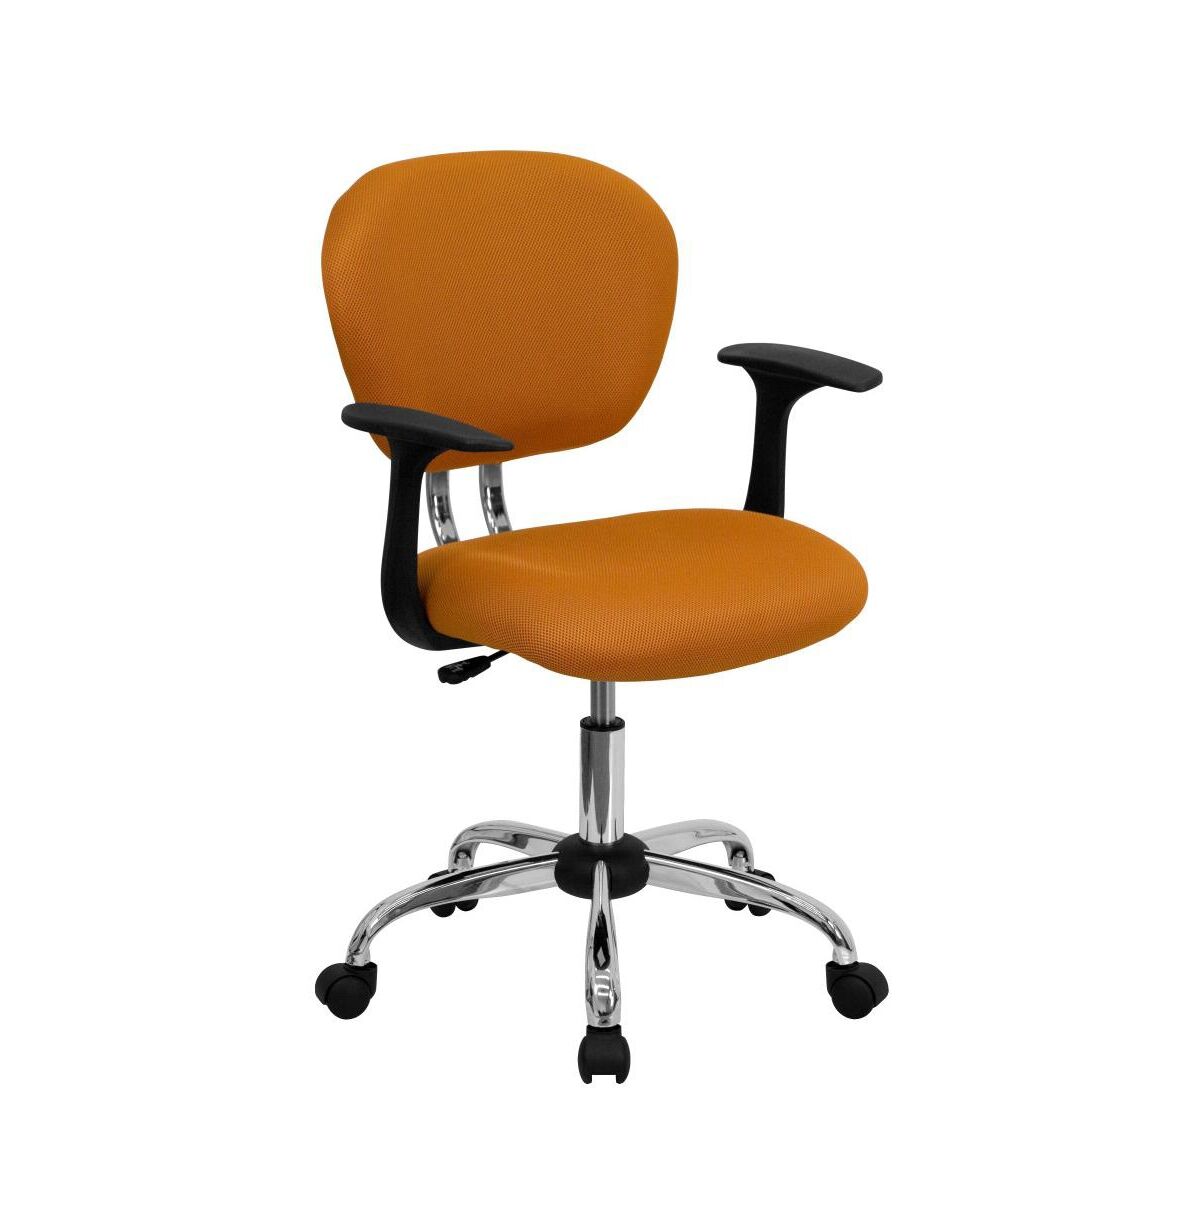 Emma+oliver Mid-Back Mesh Padded Swivel Task Office Chair With Chrome Base And Arms - Orange